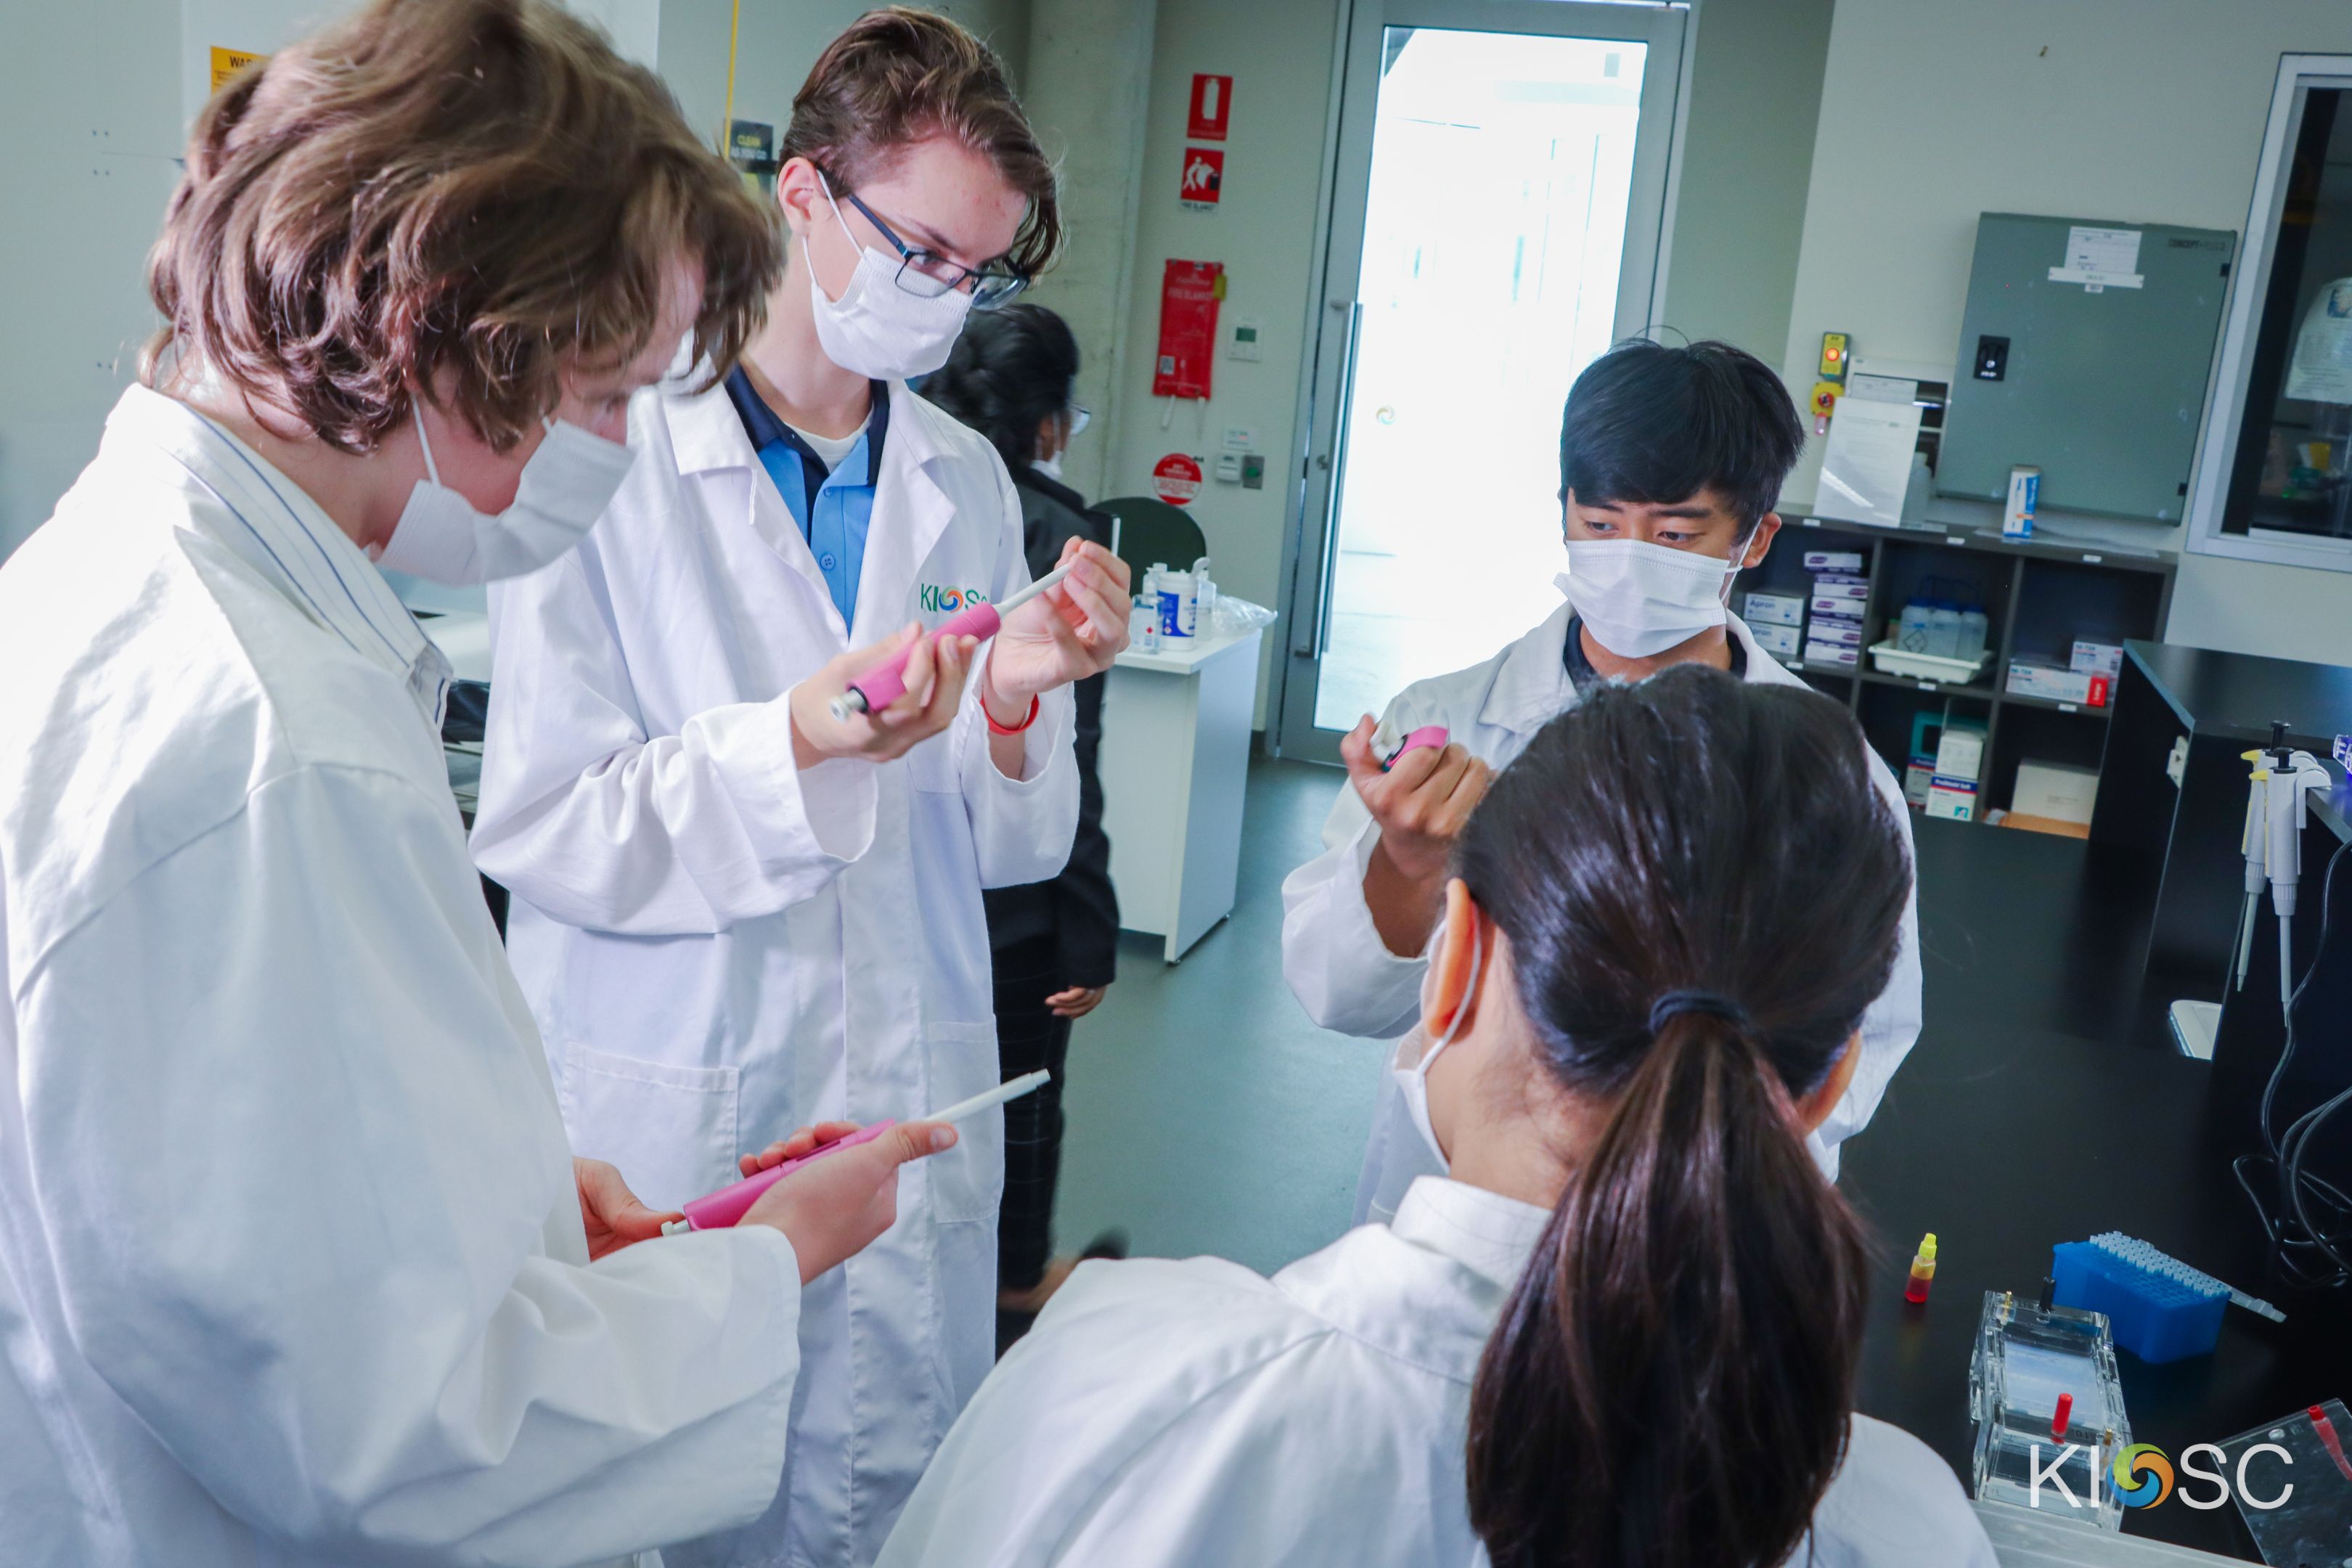 Students in a lab at KIOSC